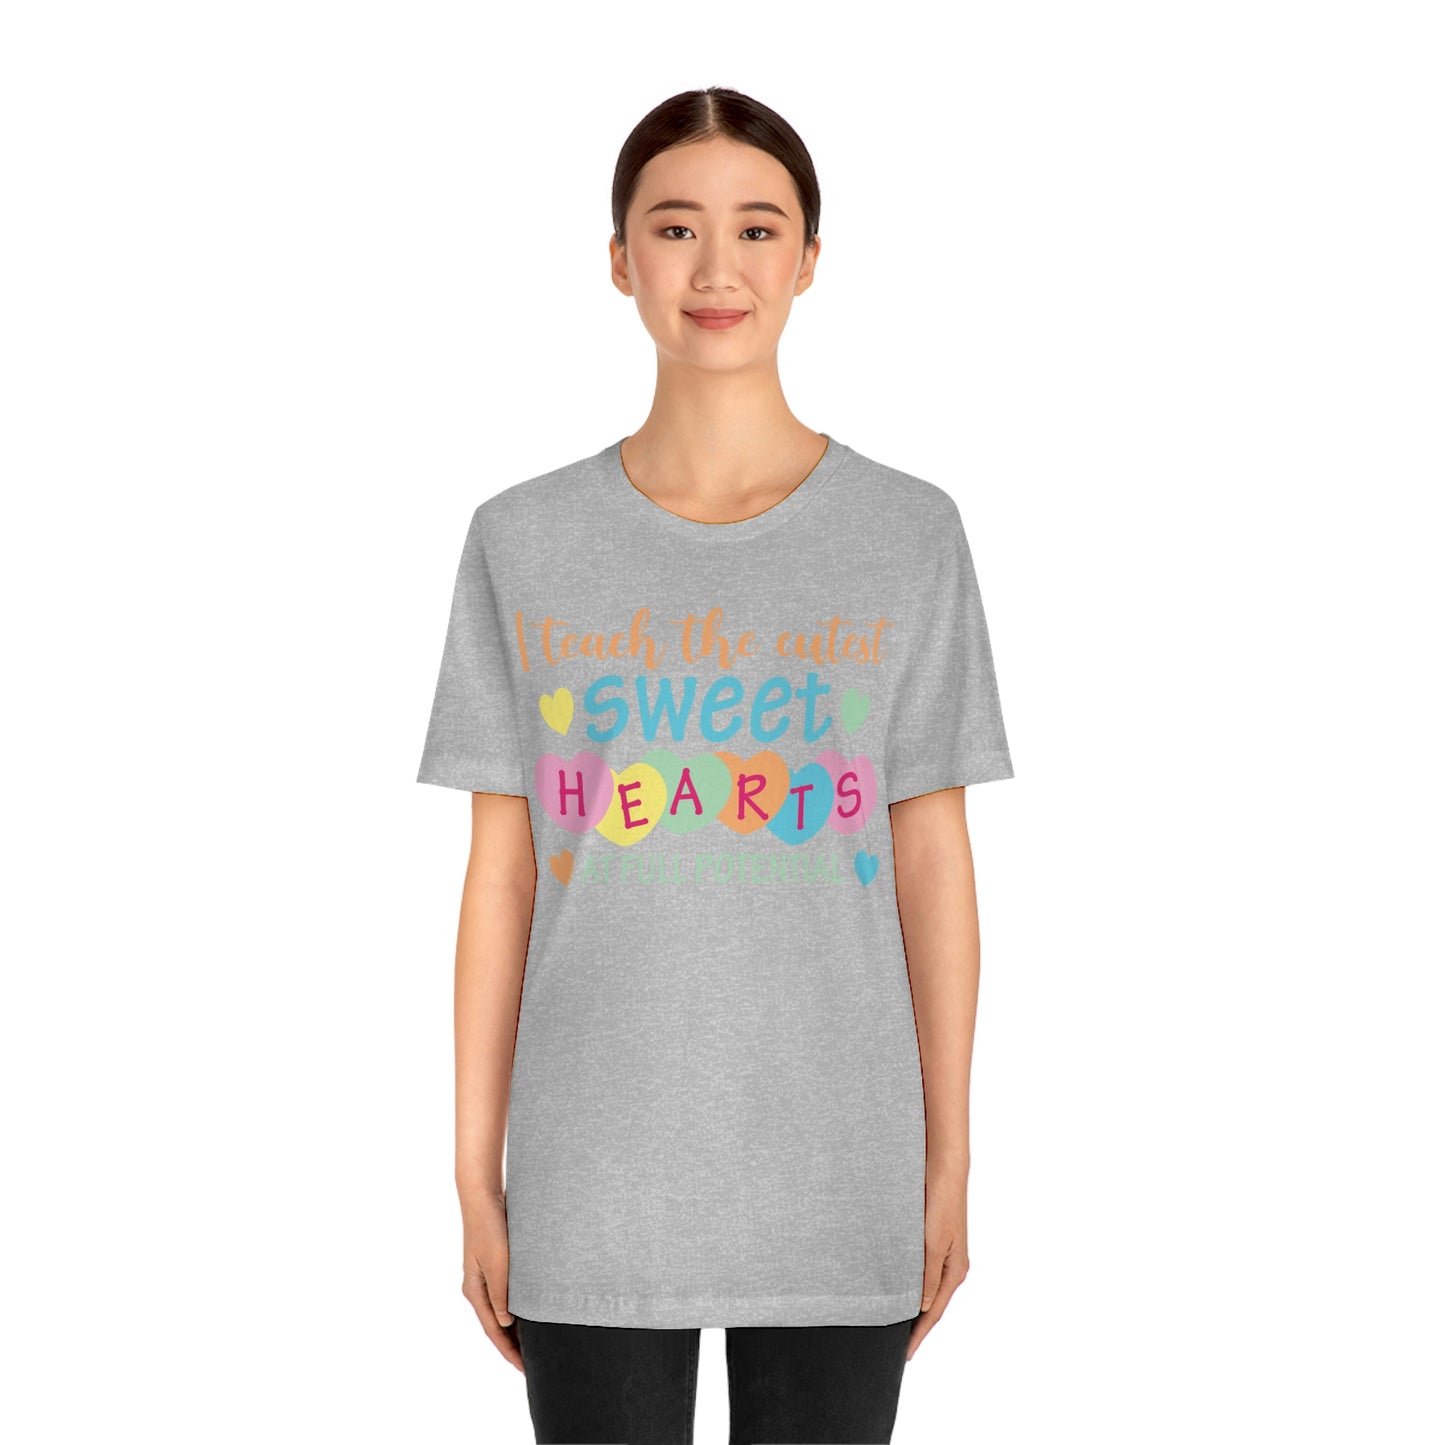 I Teach the Cutest Sweathearts at Full Potential Shirt